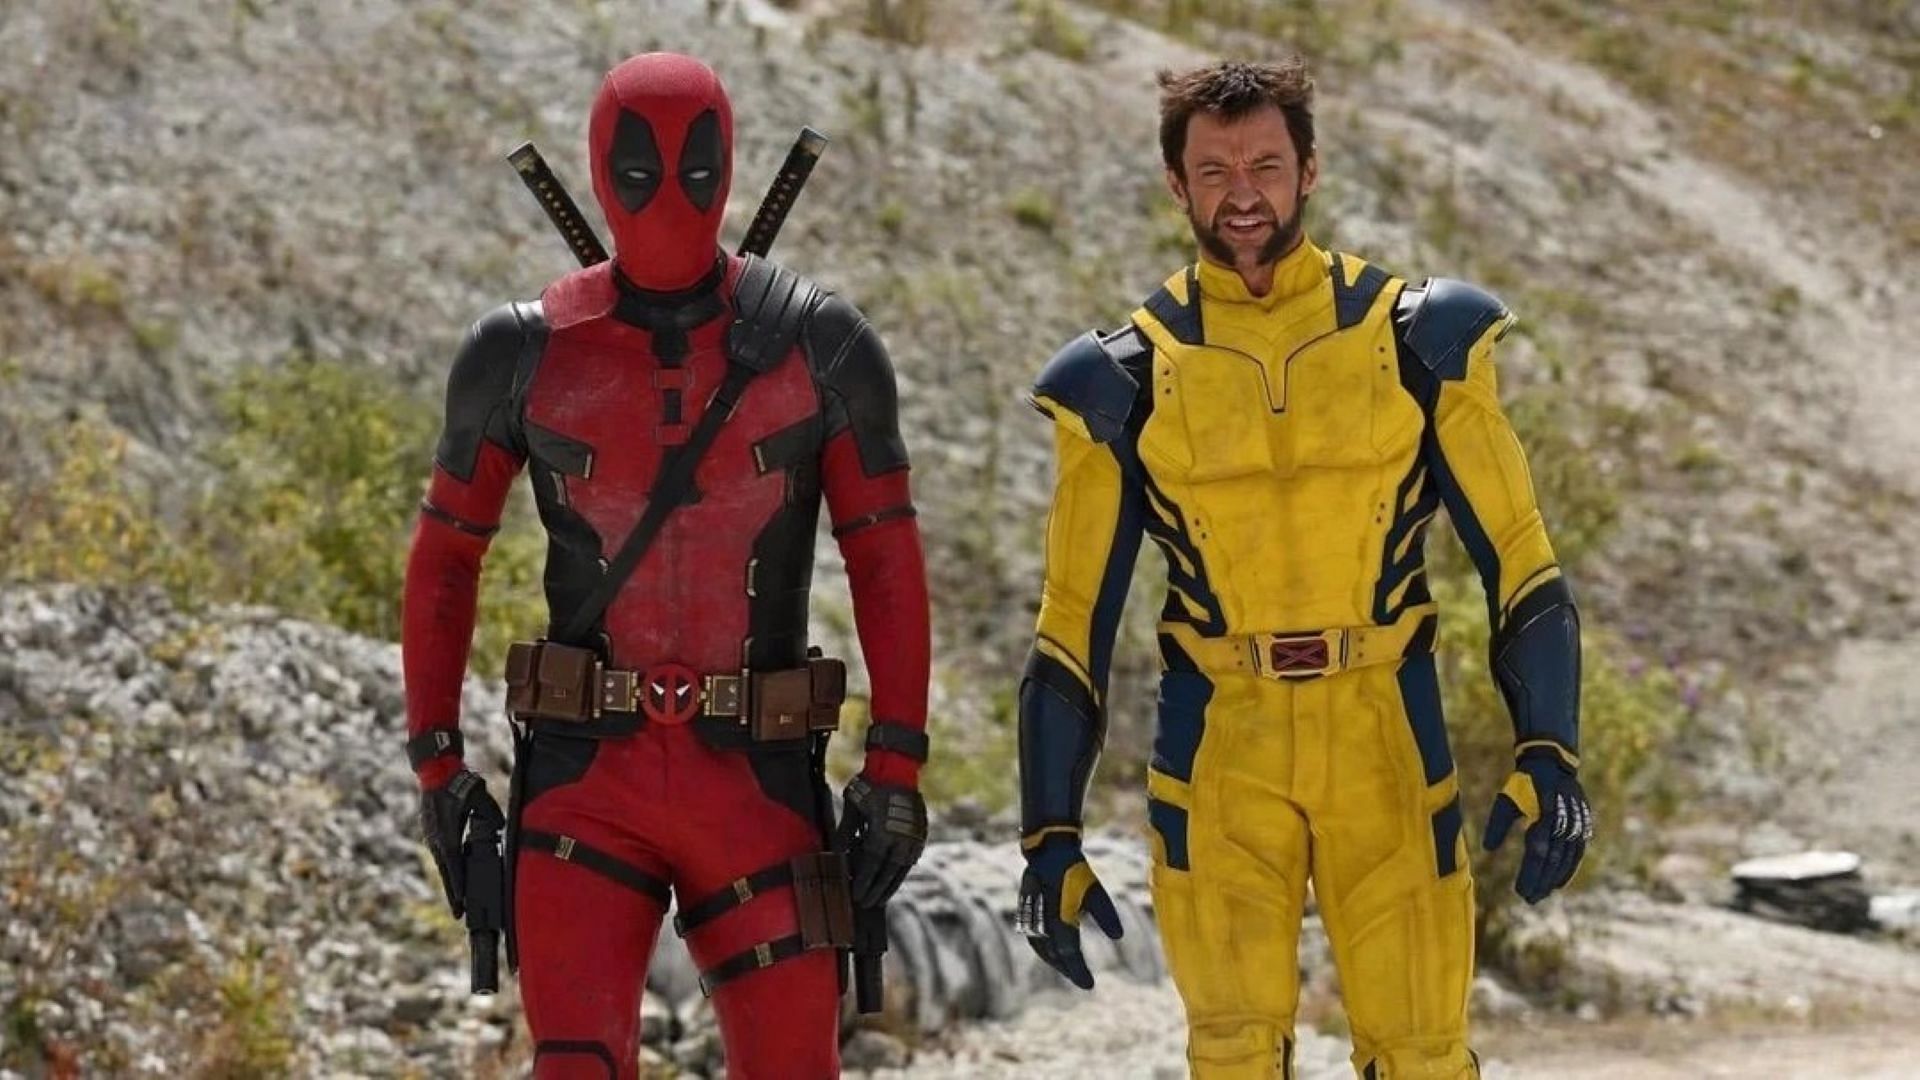 Deadpool &amp; Wolverine is one of the most anticipated Marvel movies to be released this year (Image via Instagram/Fandango)